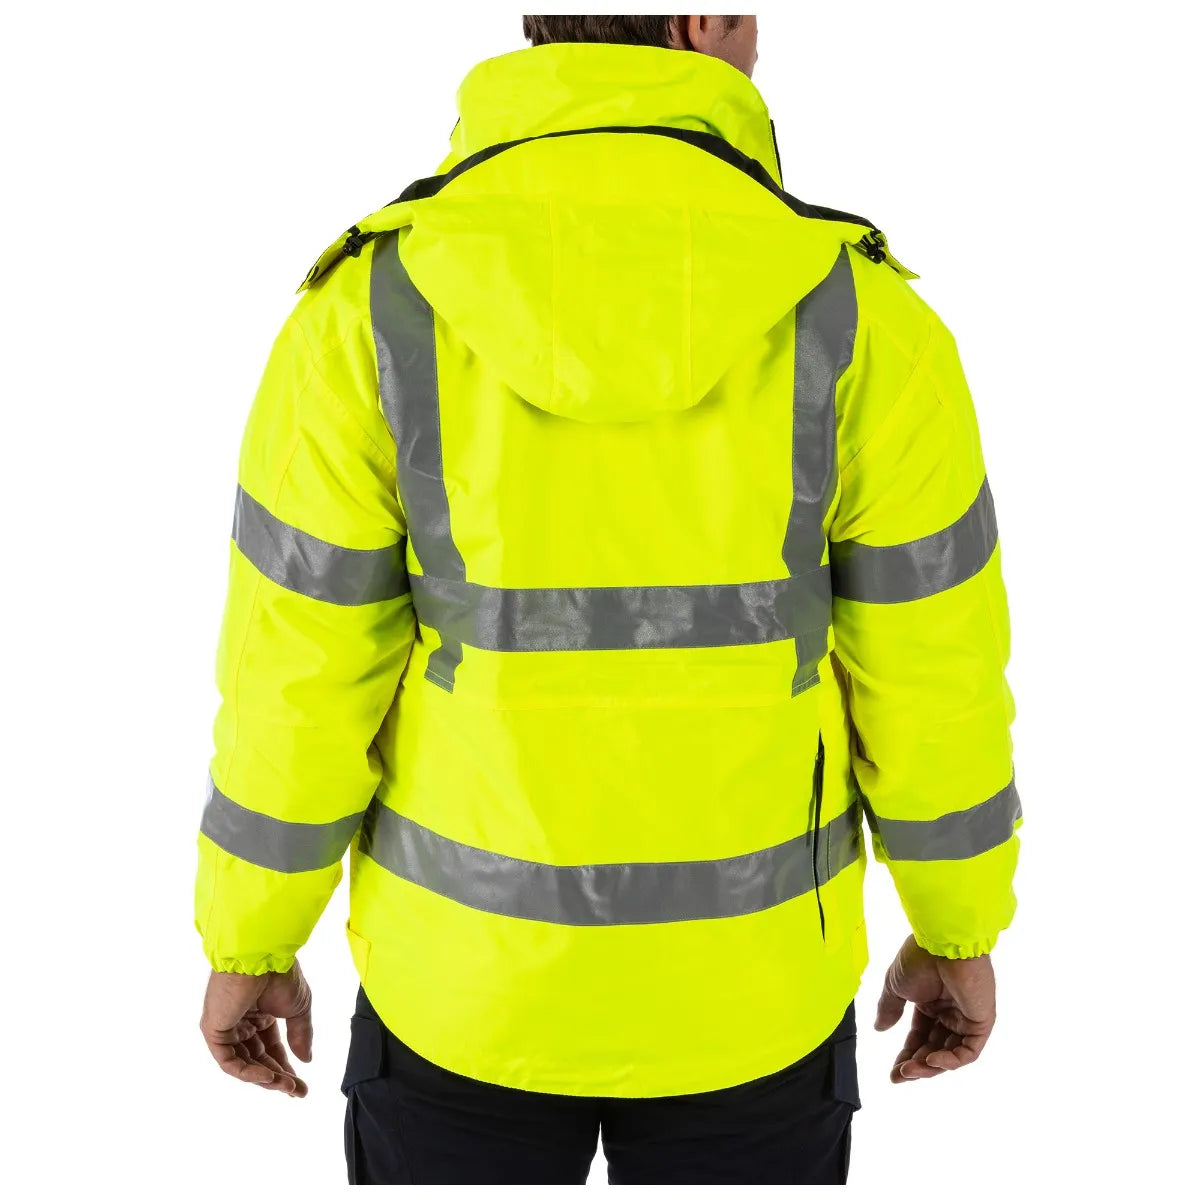 5.11 Tactical 3-In-1 Reversible High Visibility Parka